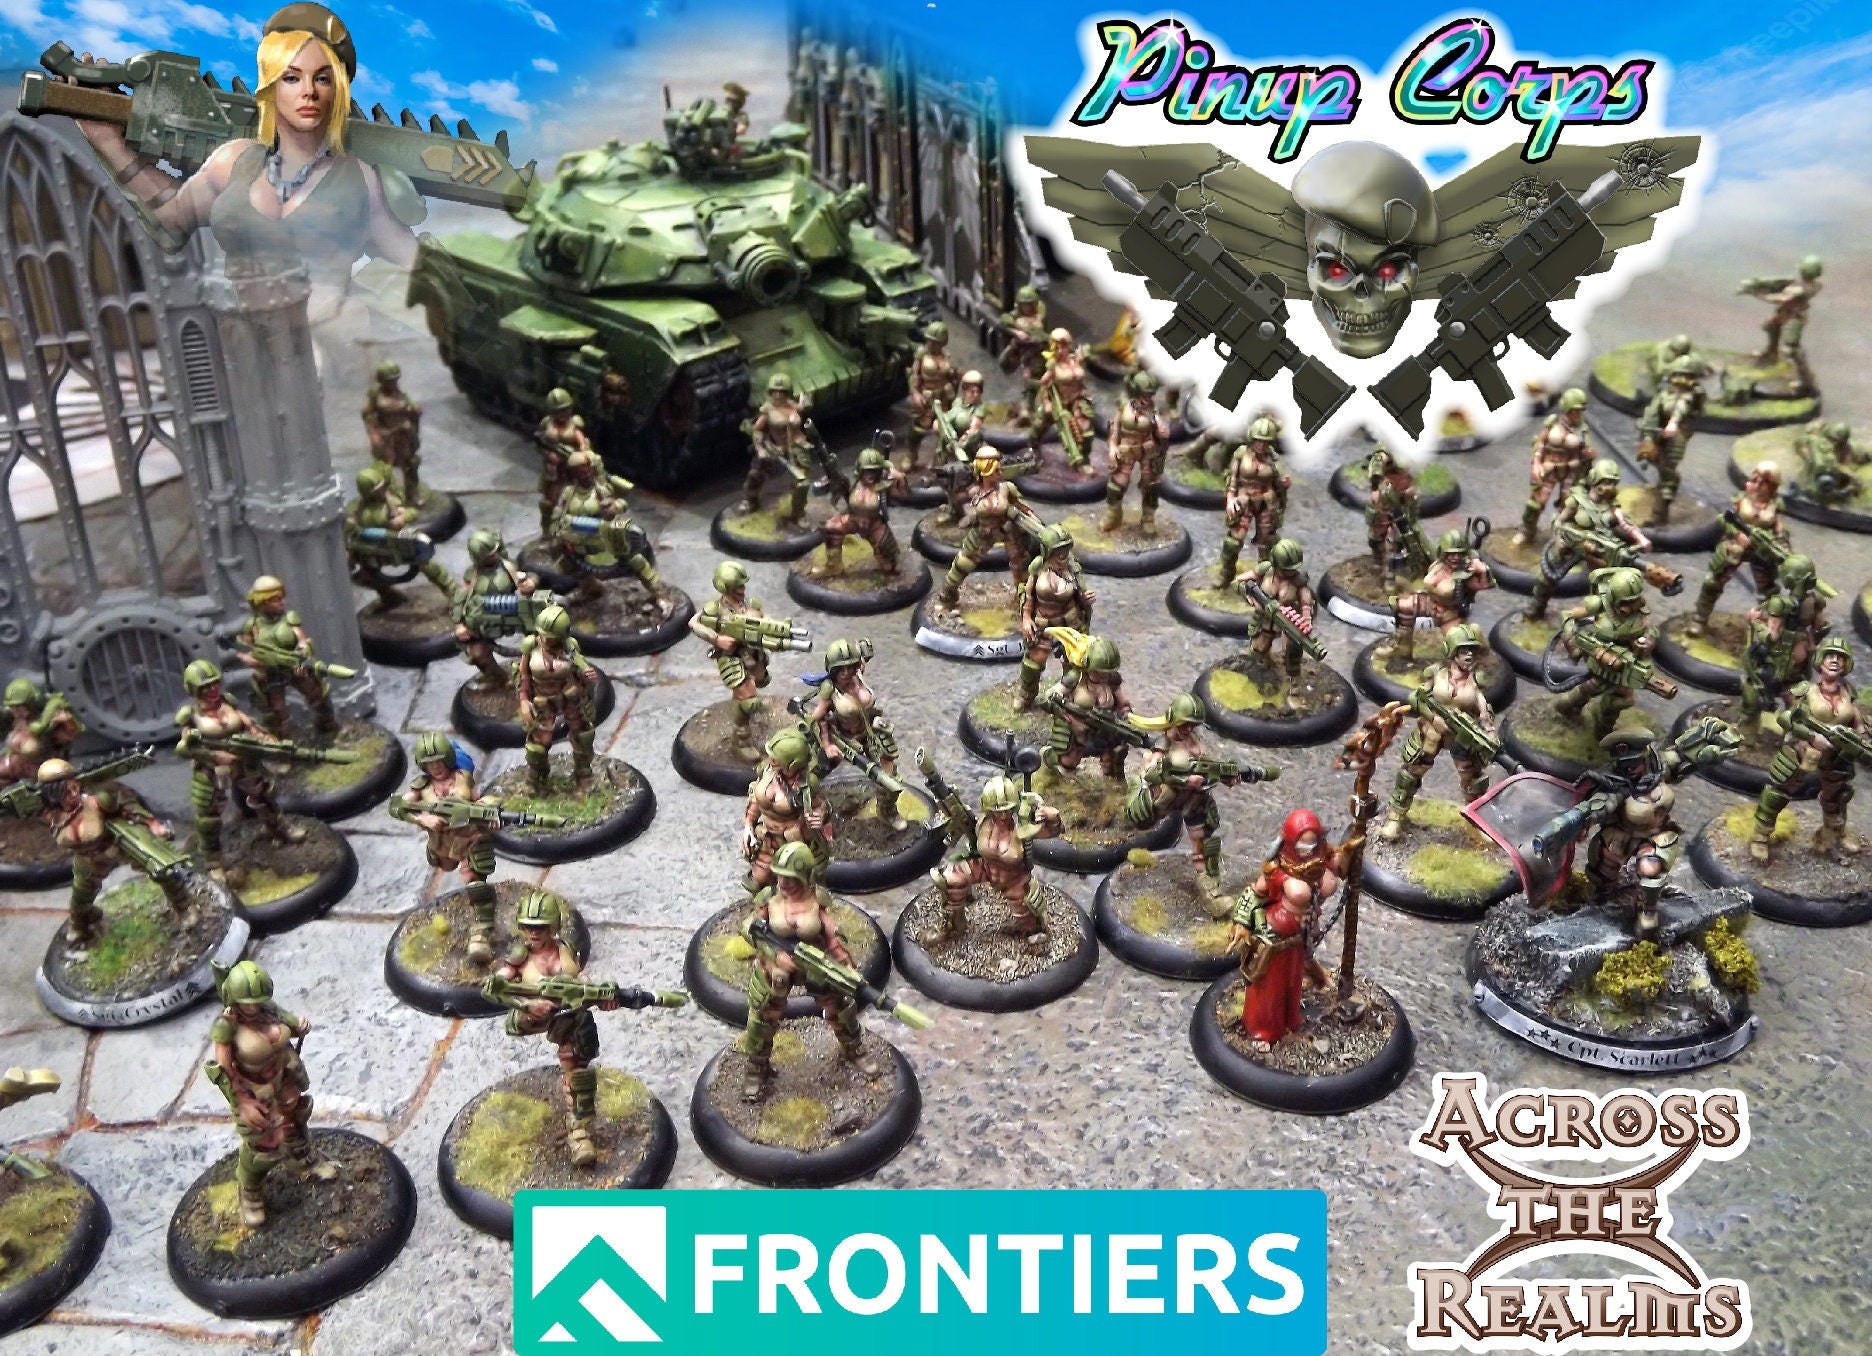 Pinup Corps Stormbabe Granatwerfer - Across the Realms | 32 mm